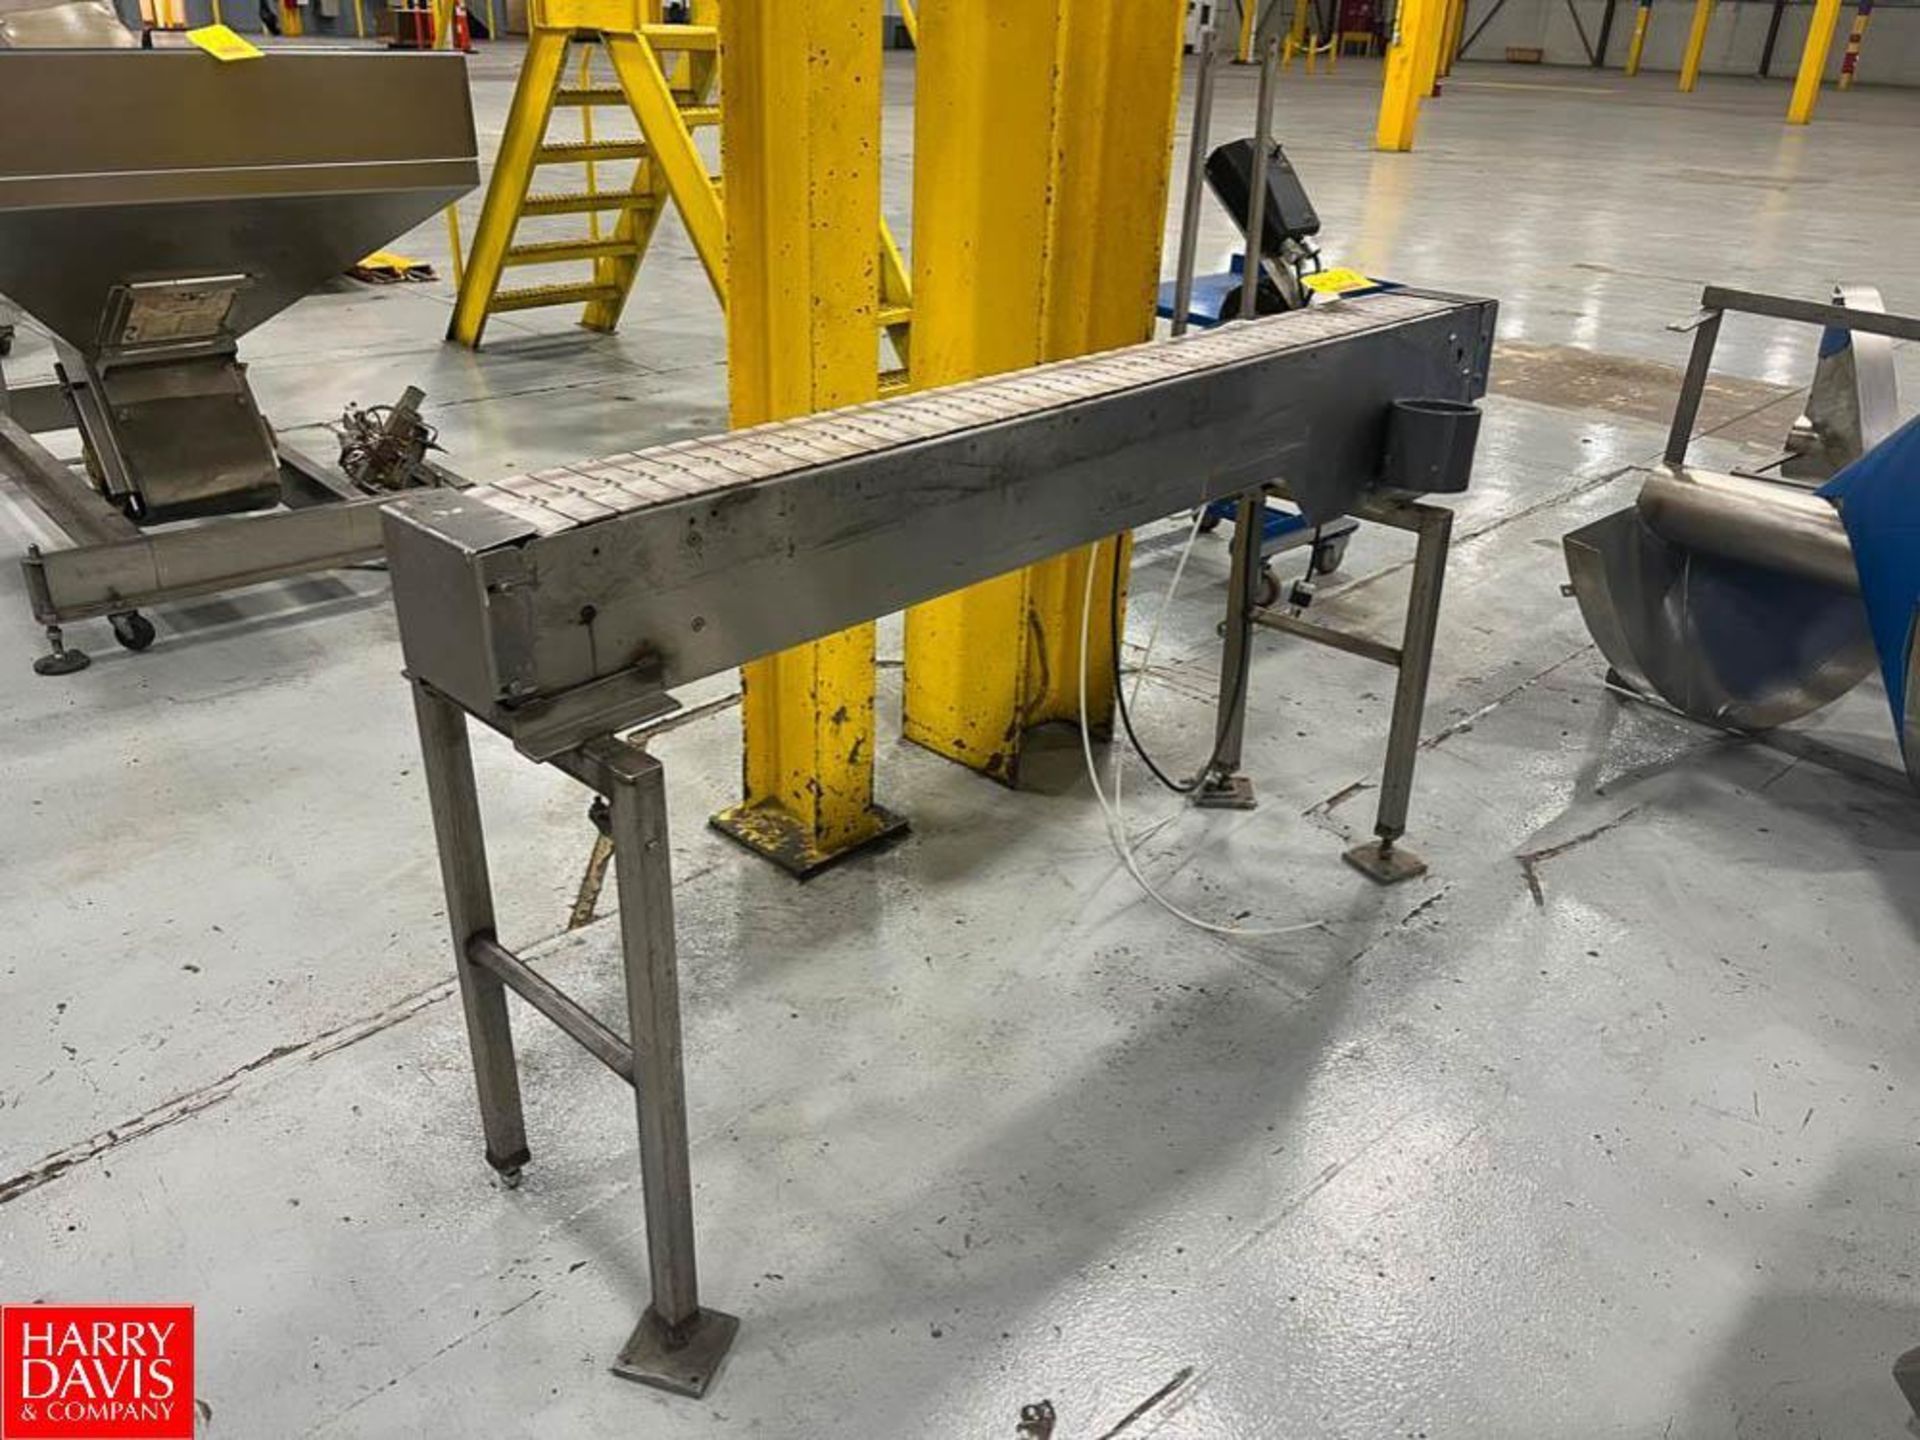 Label-Aire S/S Framed Conveyor with Drive NE Controls, Dimensions = 64" x 6" - Rigging Fee: $100